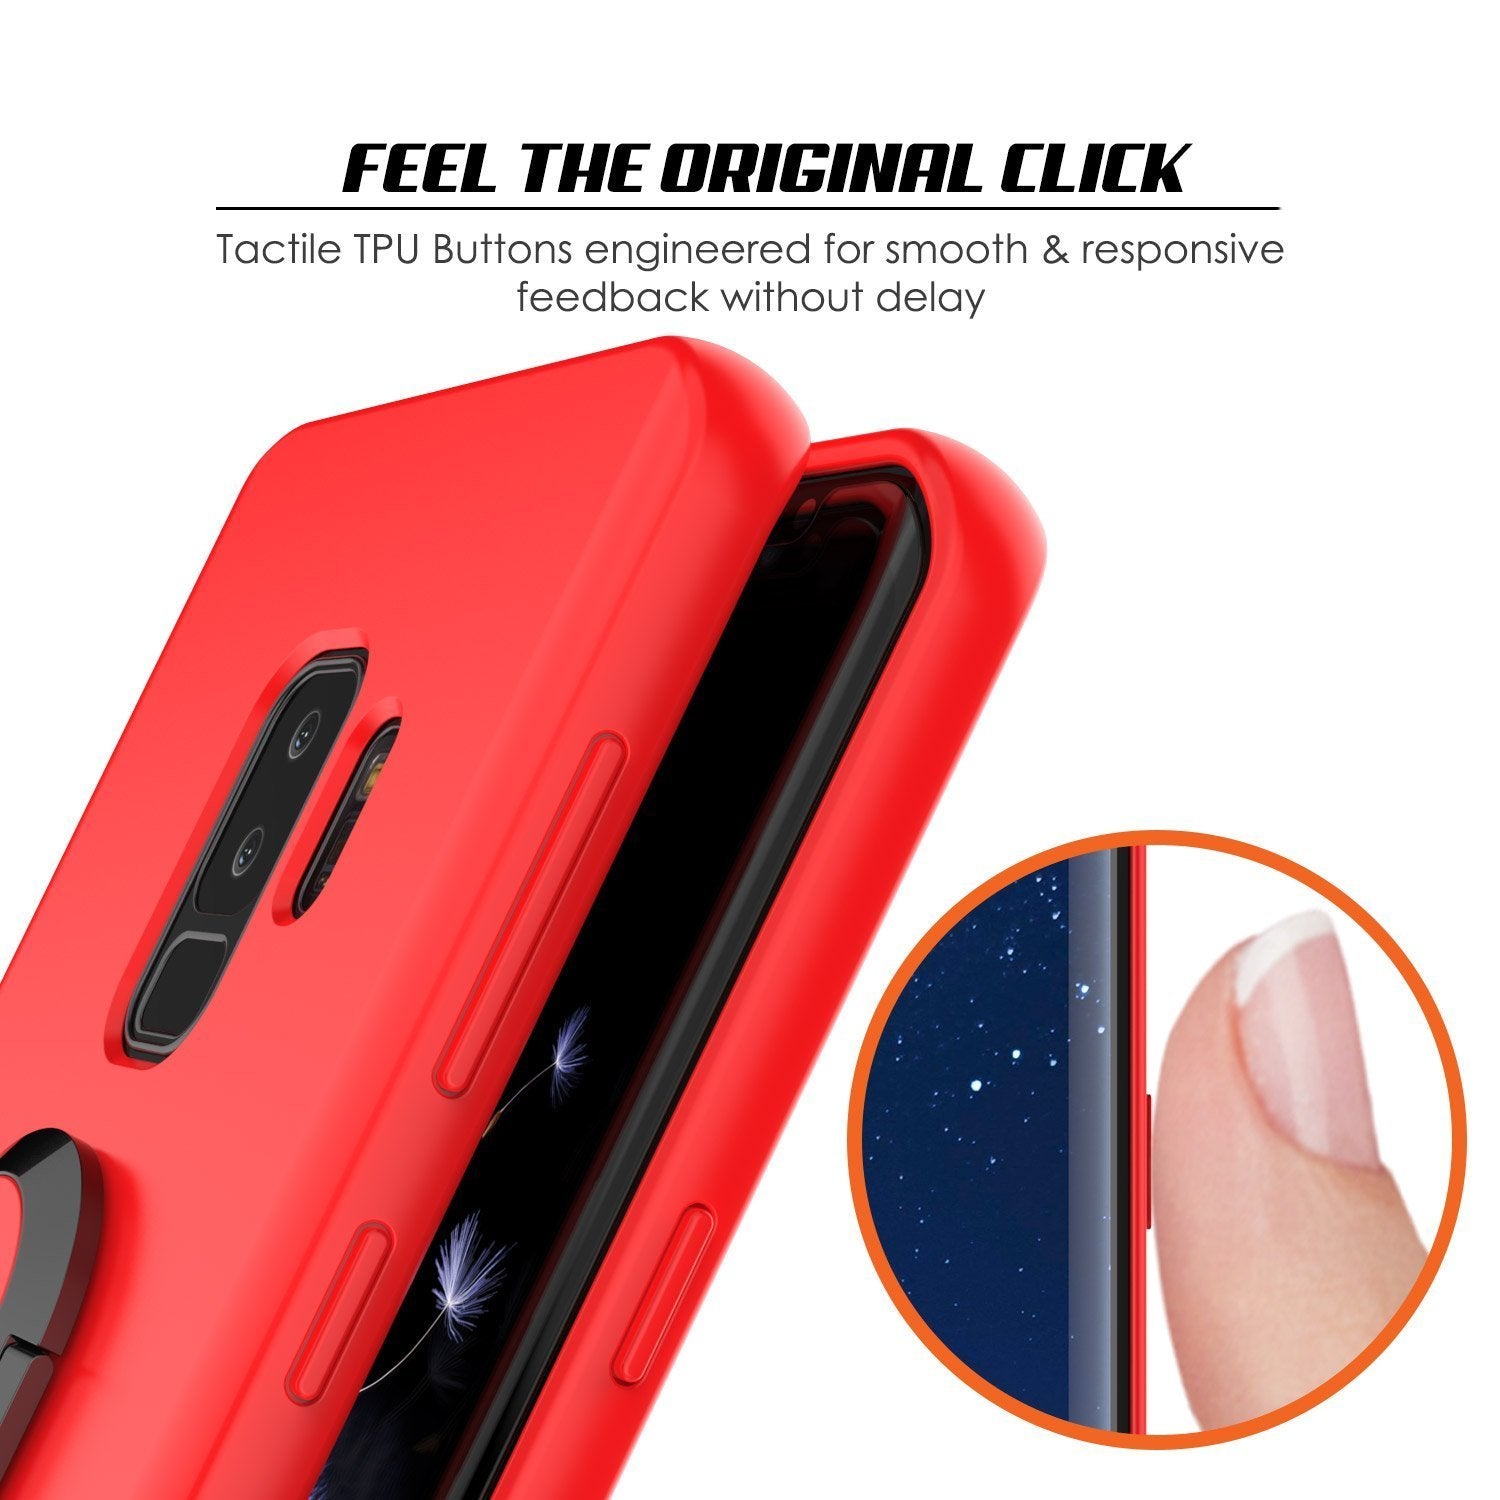 Galaxy S9 PLUS Magnetix Protective Screen Protector Cover [Red]